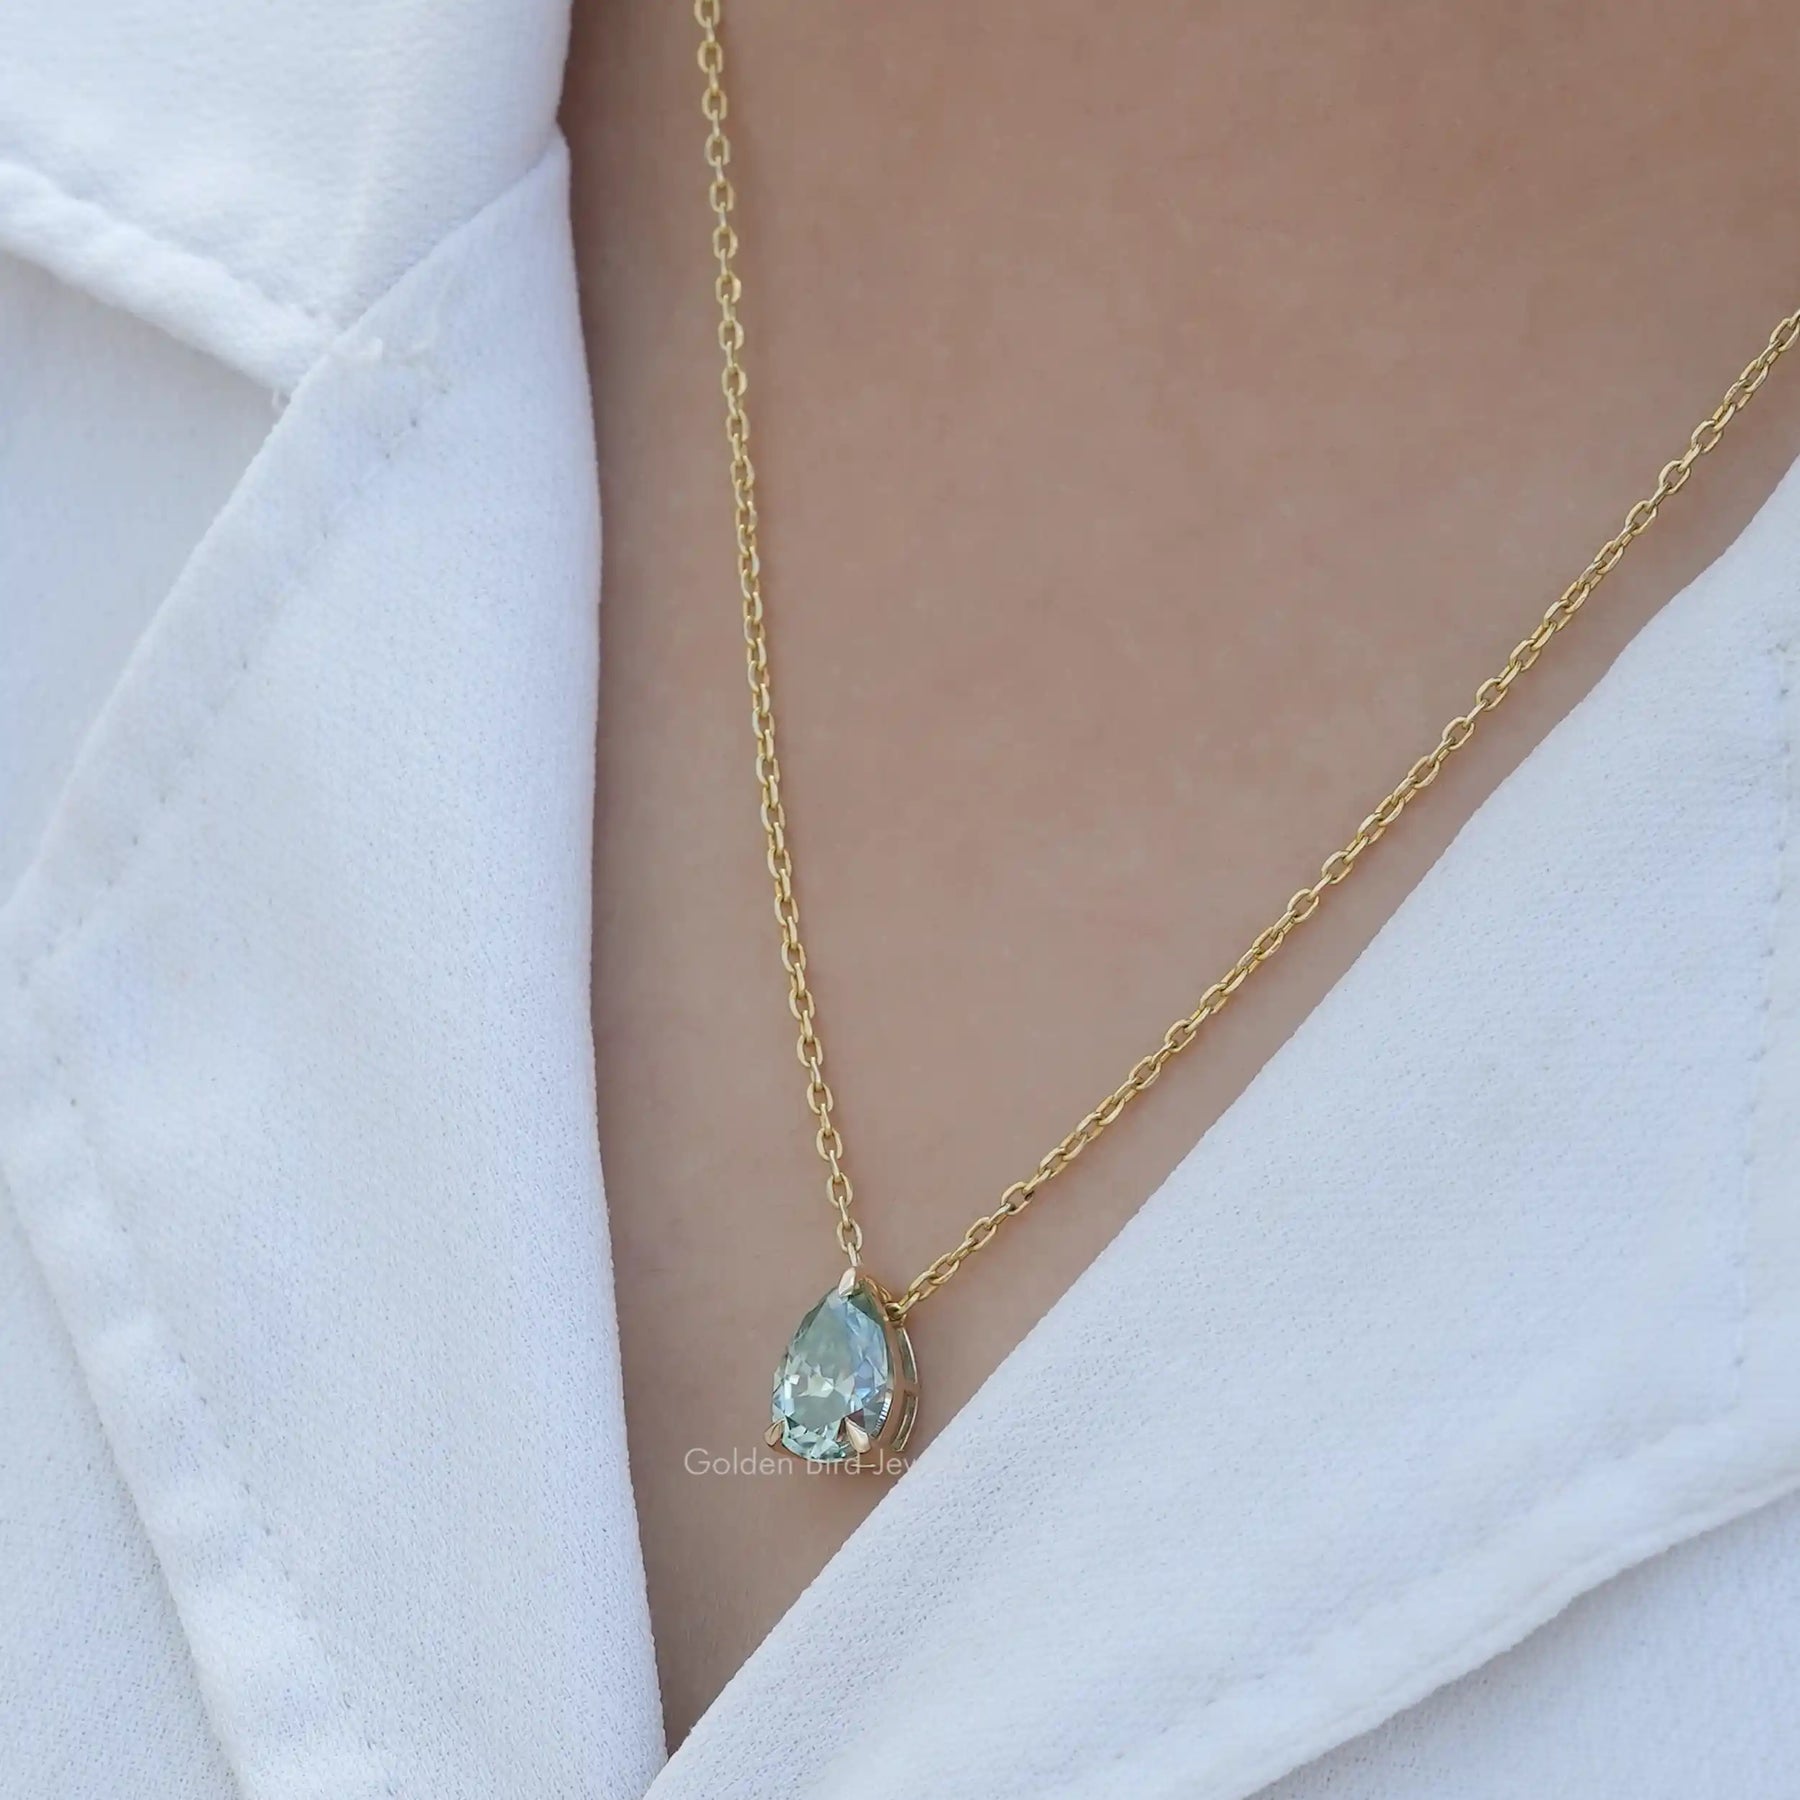 [Pear cut moissanite pendant crafted with vvs clarity and blue color moissanite]-[Golden Bird Jewels]